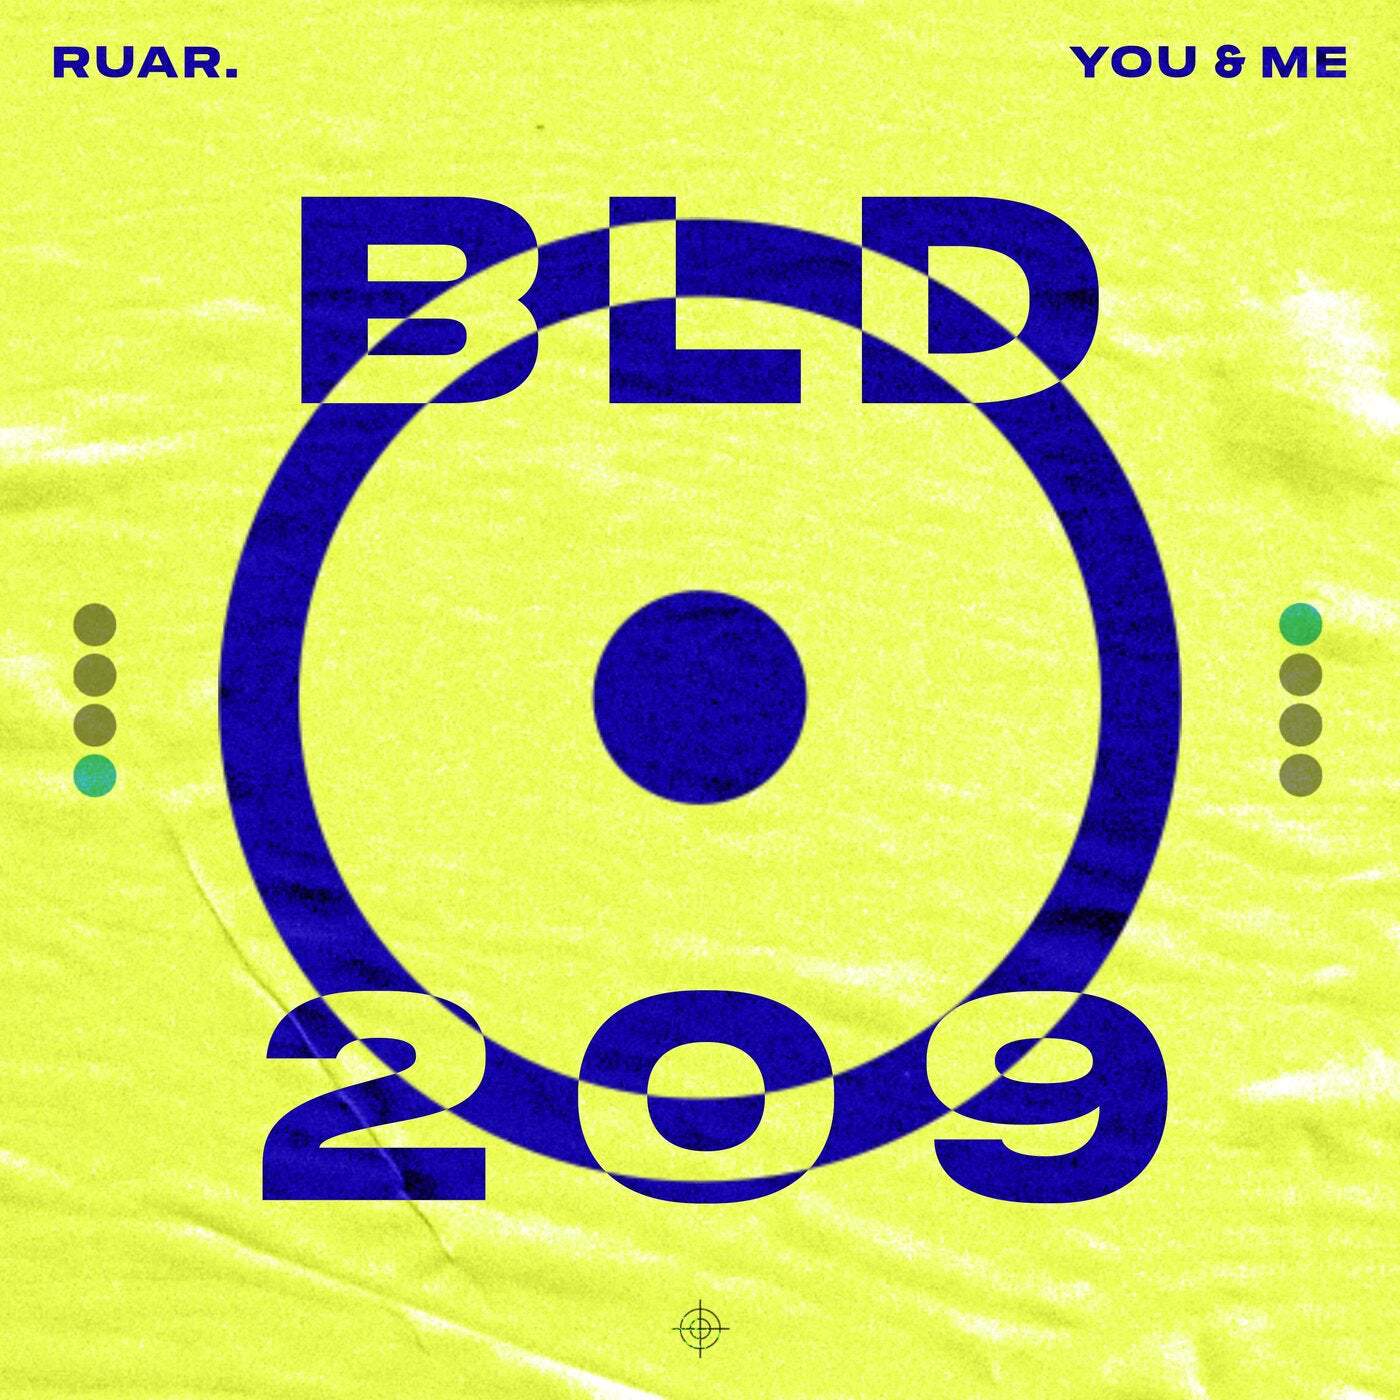 Download ruar. - You & Me on Electrobuzz